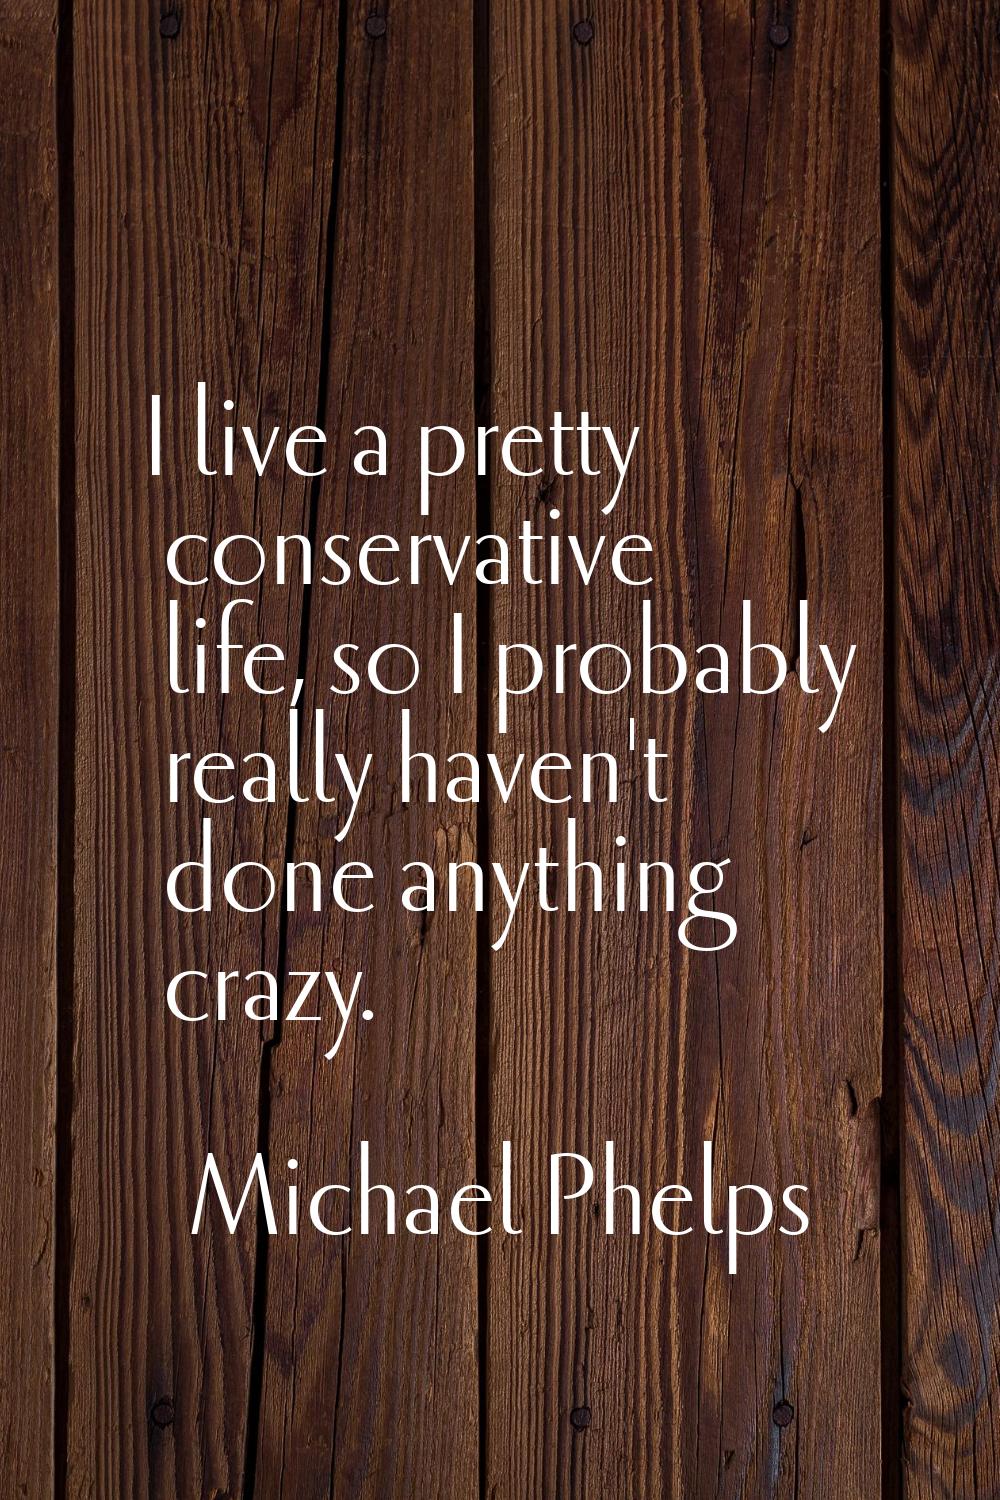 I live a pretty conservative life, so I probably really haven't done anything crazy.